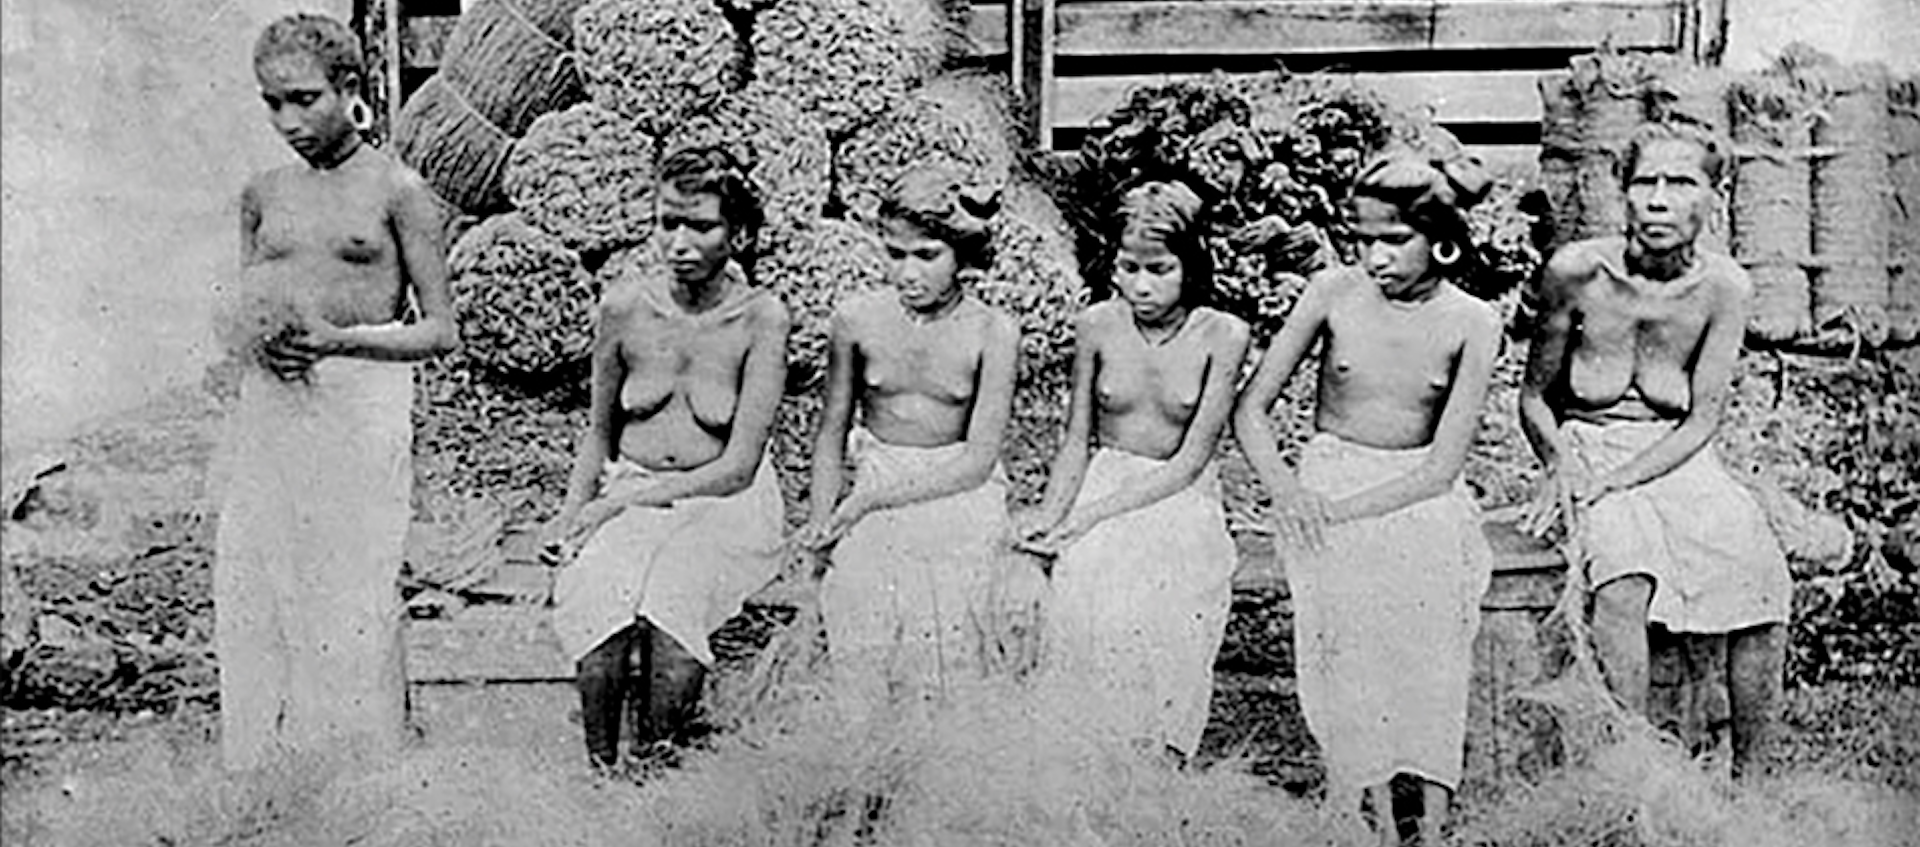 Historic archive image of six bare-breasted Indian women of various ages sitting in a row